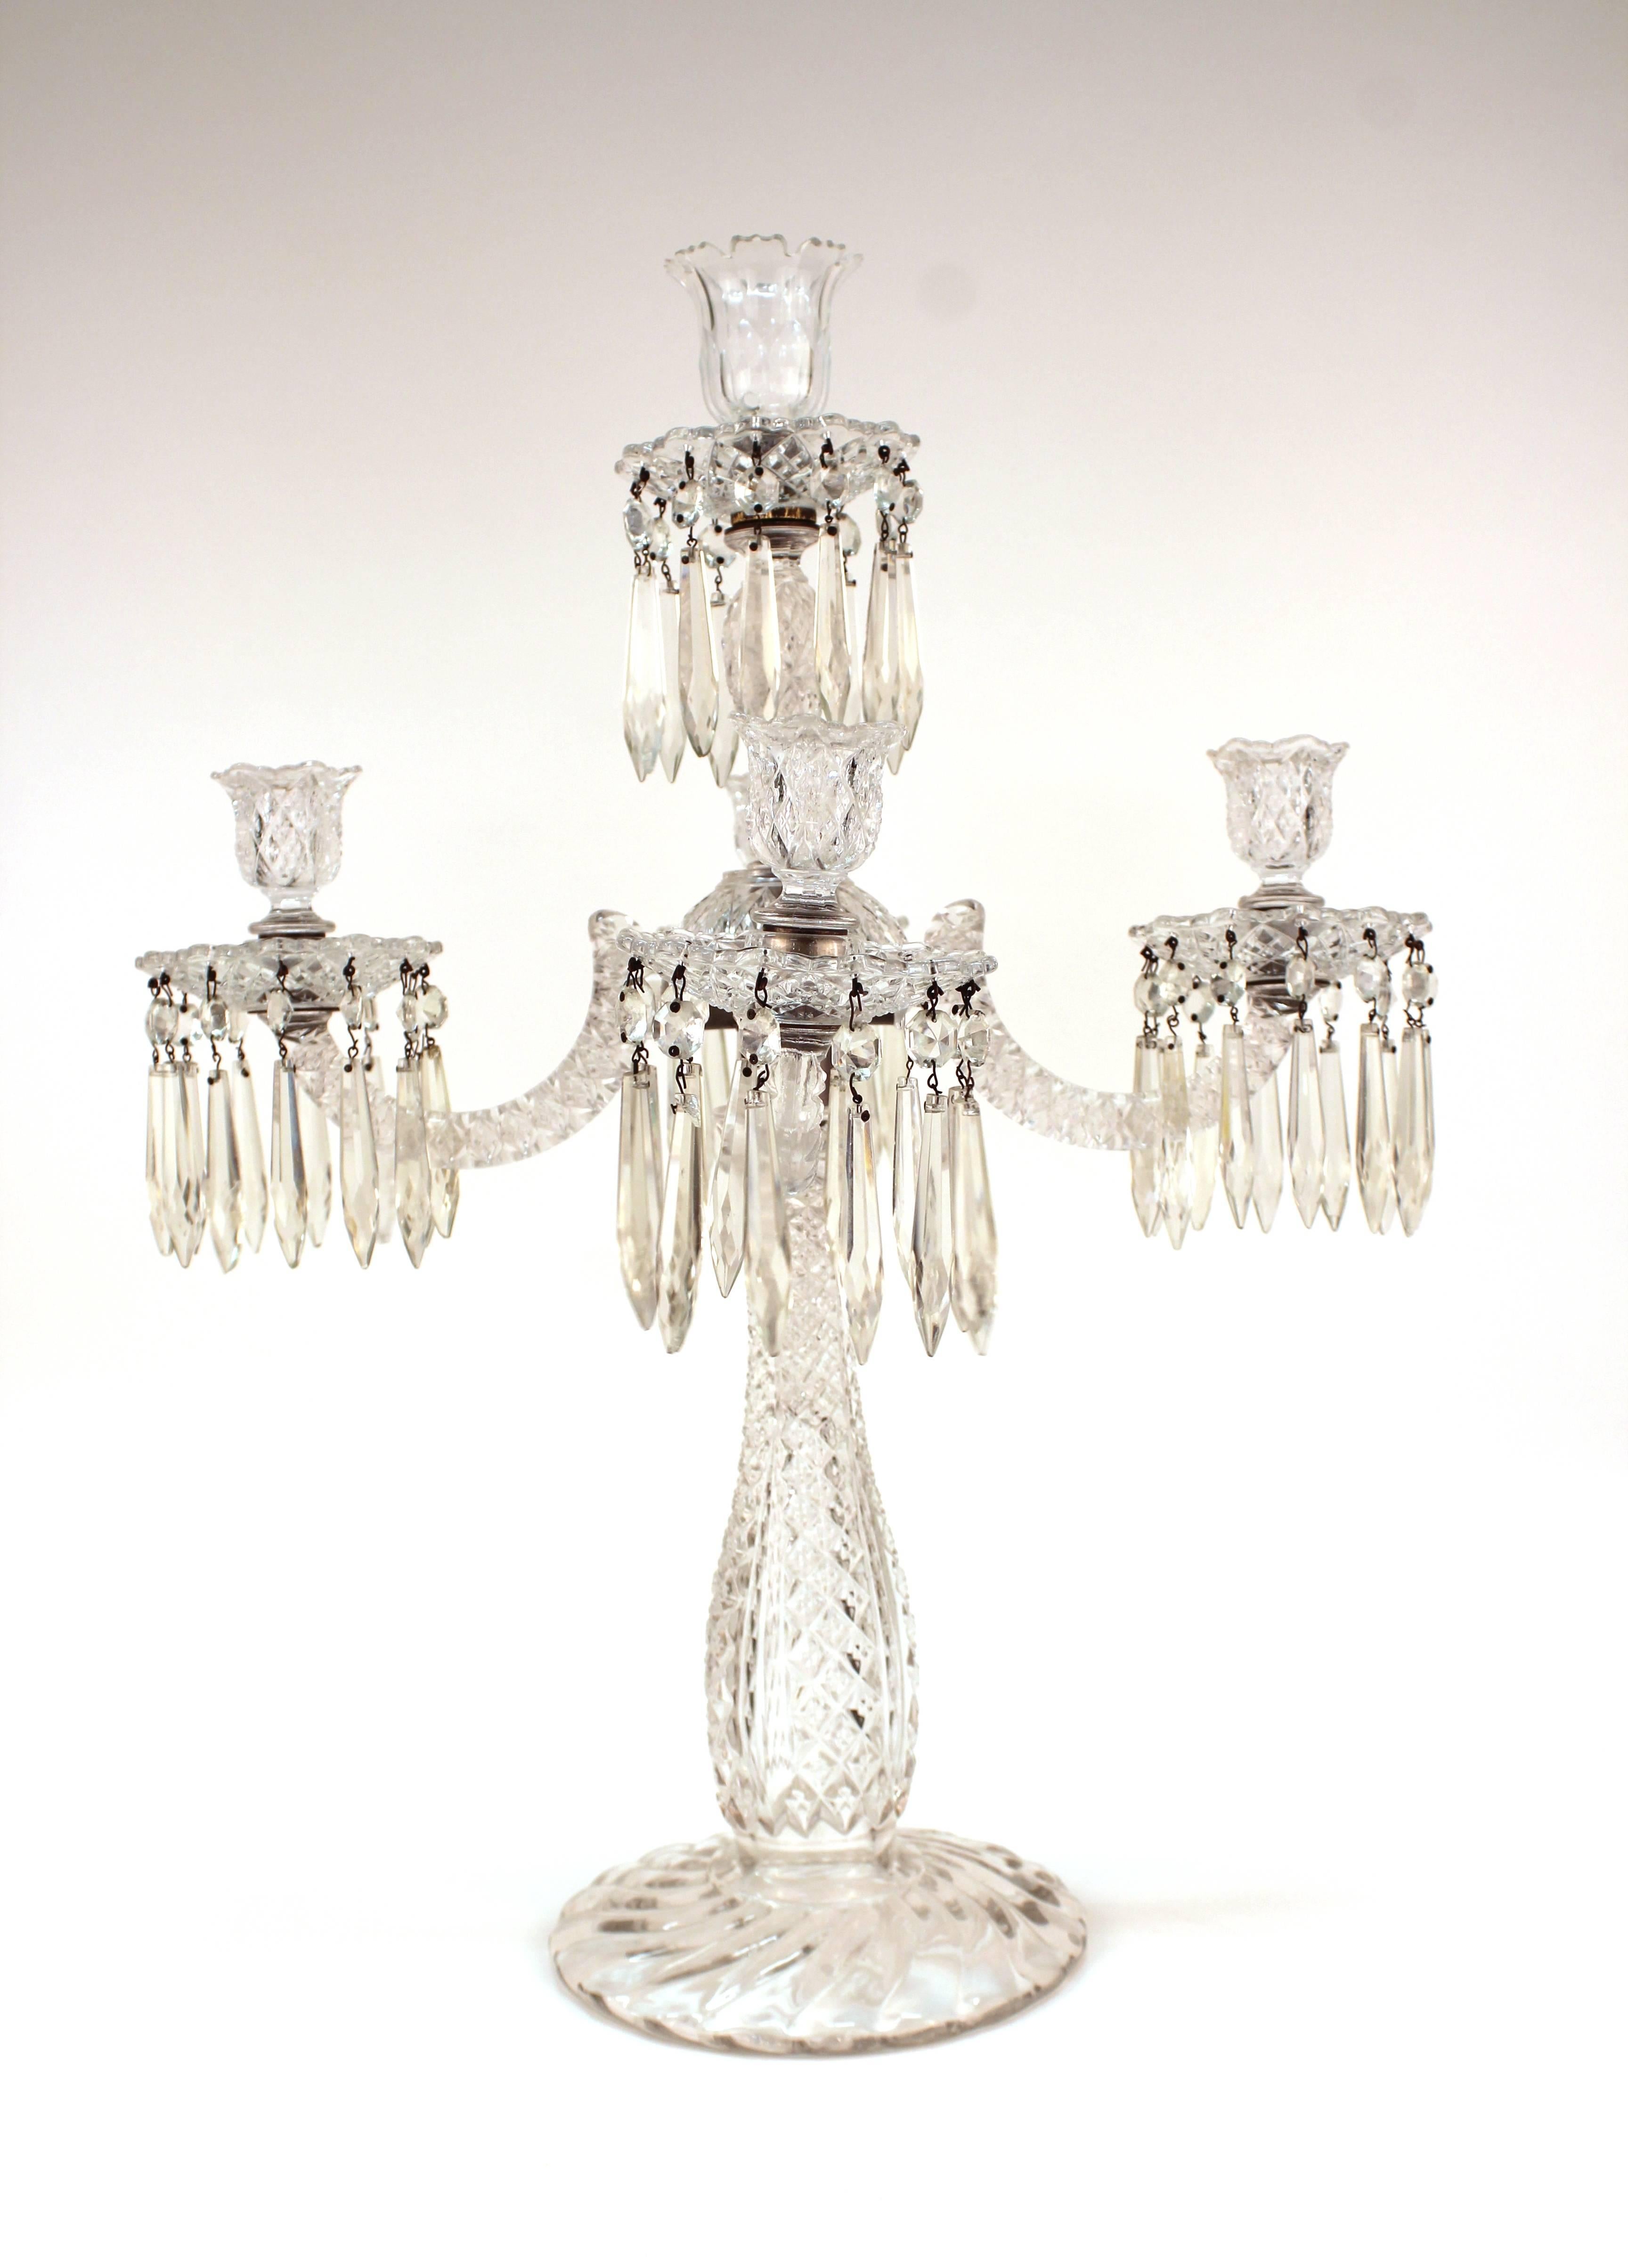 Sandwich glass Duncan Miller candelabra with one central stem and four branches. The piece is in good vintage condition.